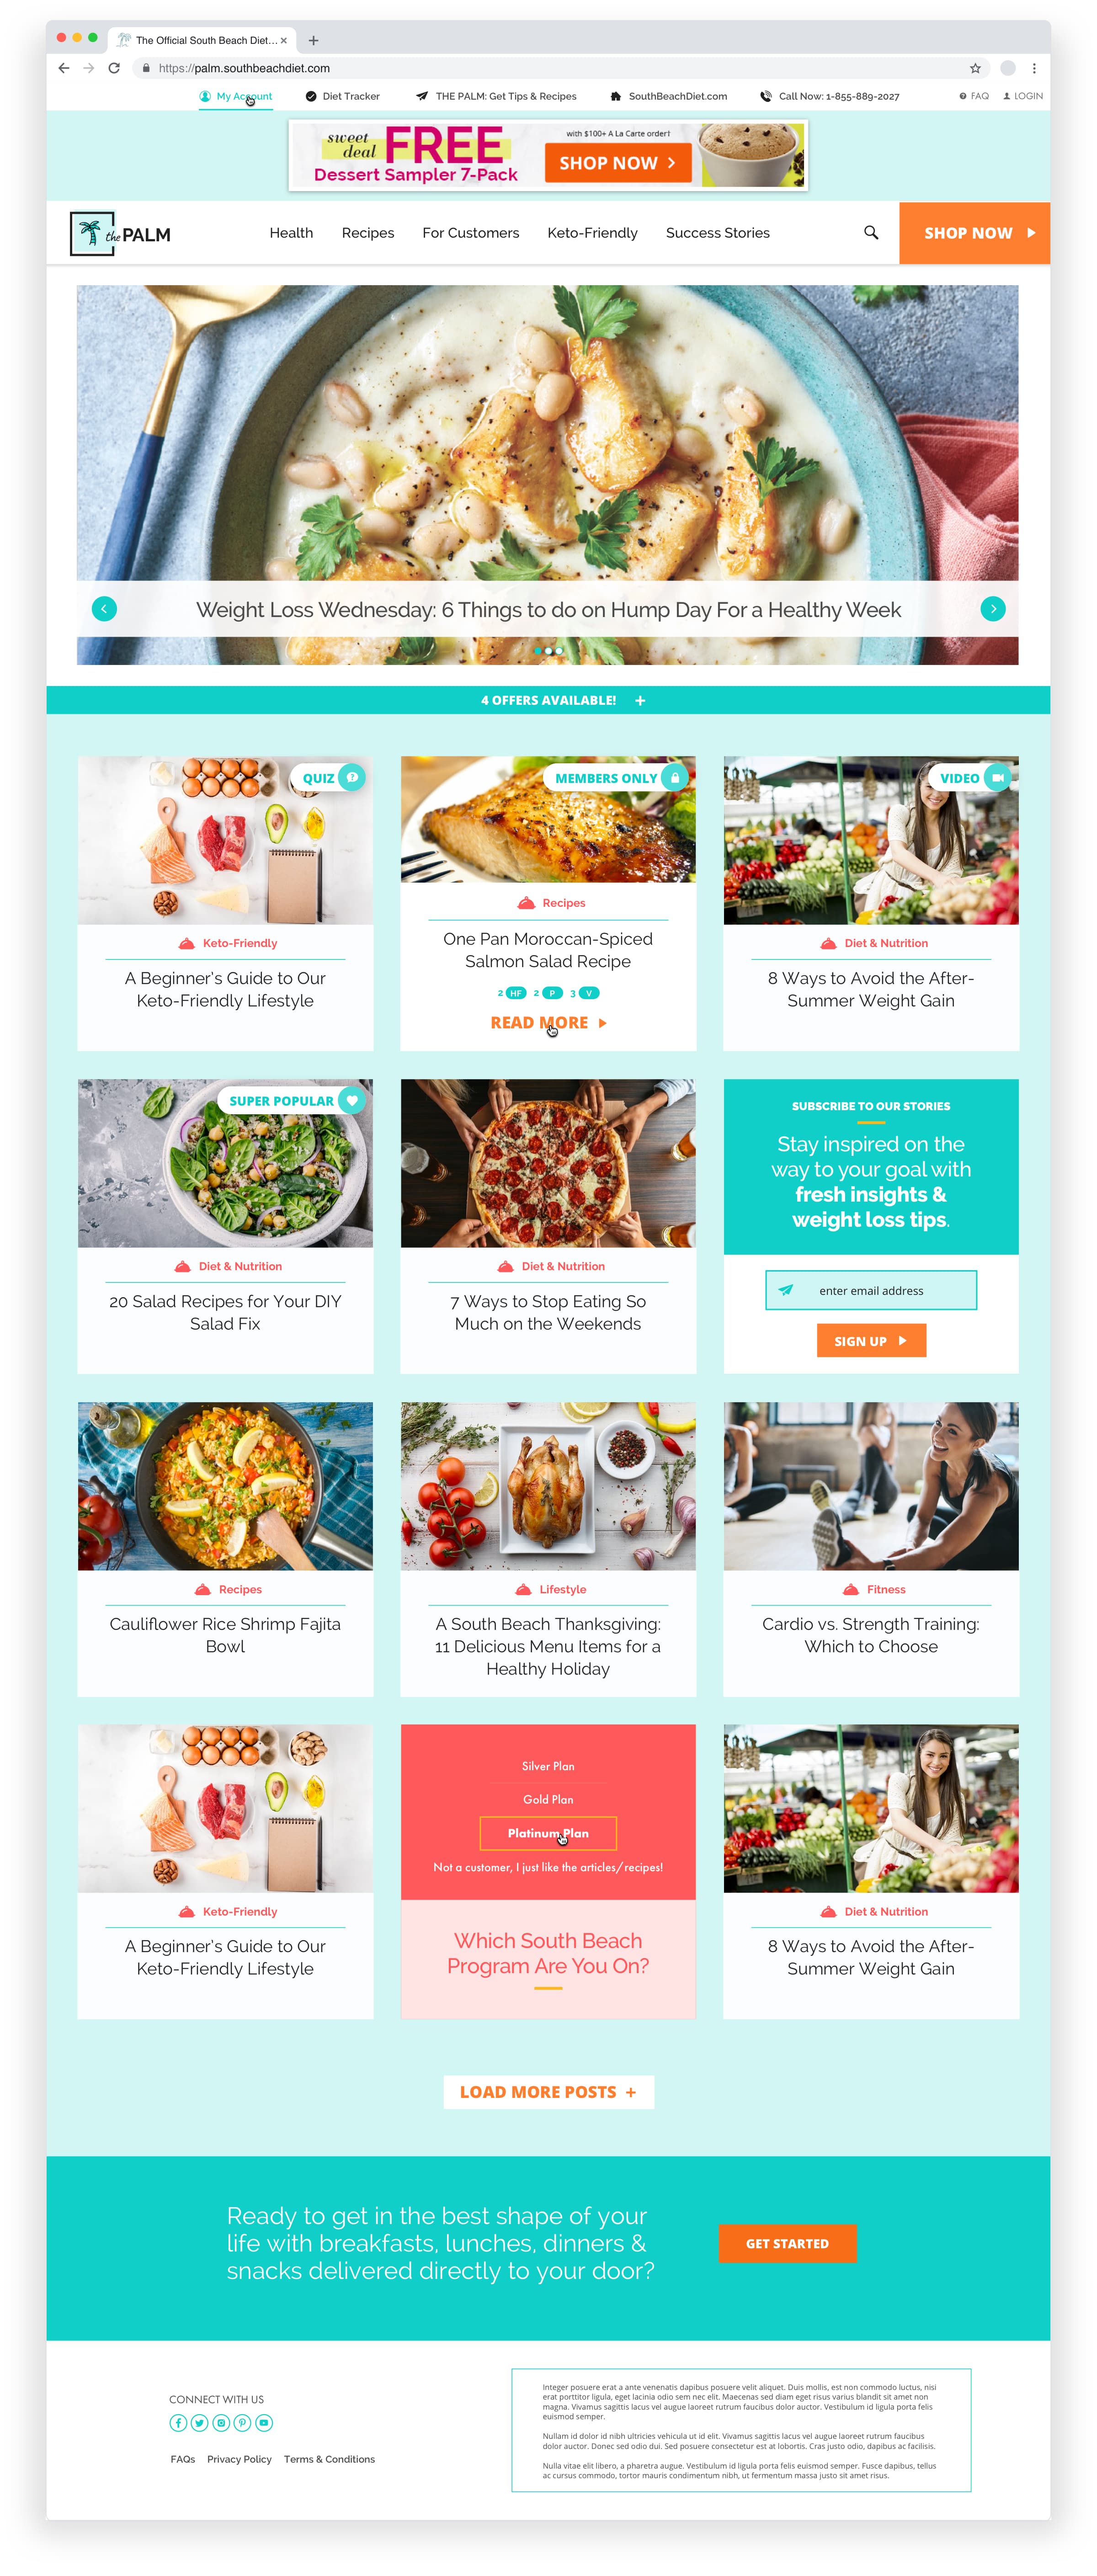 King Design South Beach Diet The Palm Blog 2020 Homepage Redesign Unsmushed